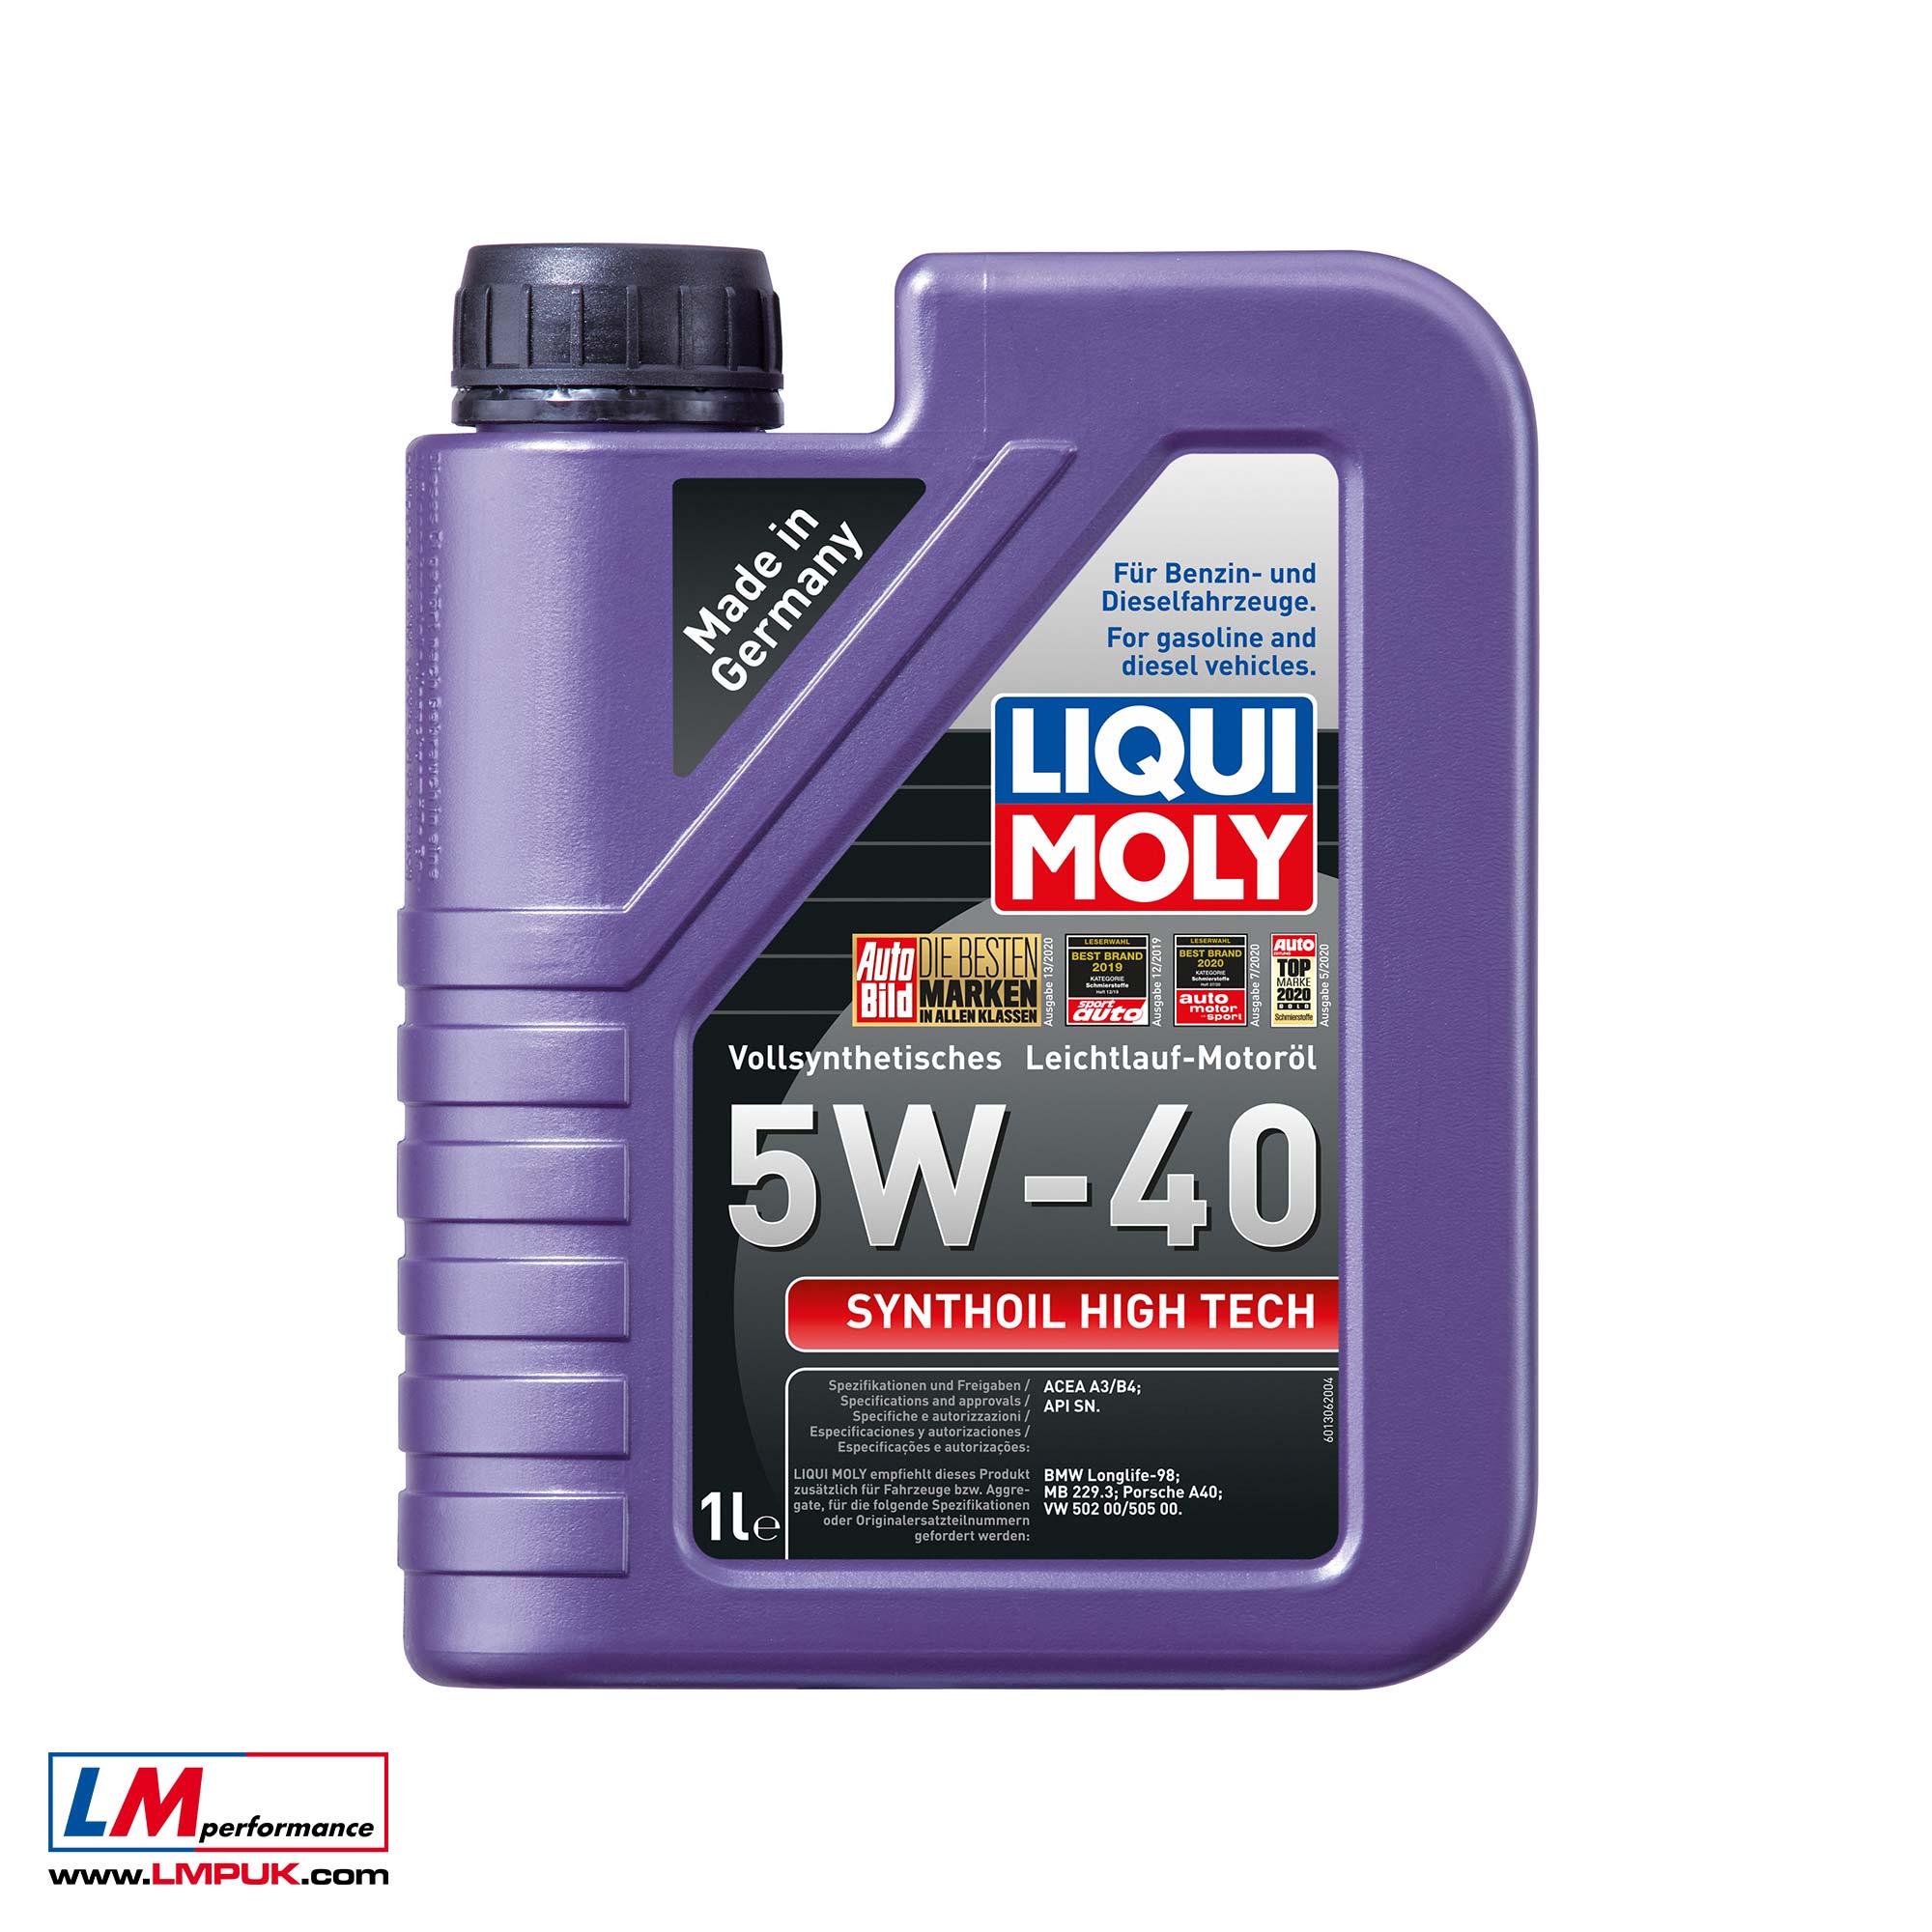 Synthoil High Tech 5W-40 Engine Oil by LIQUI MOLY – LM Performance